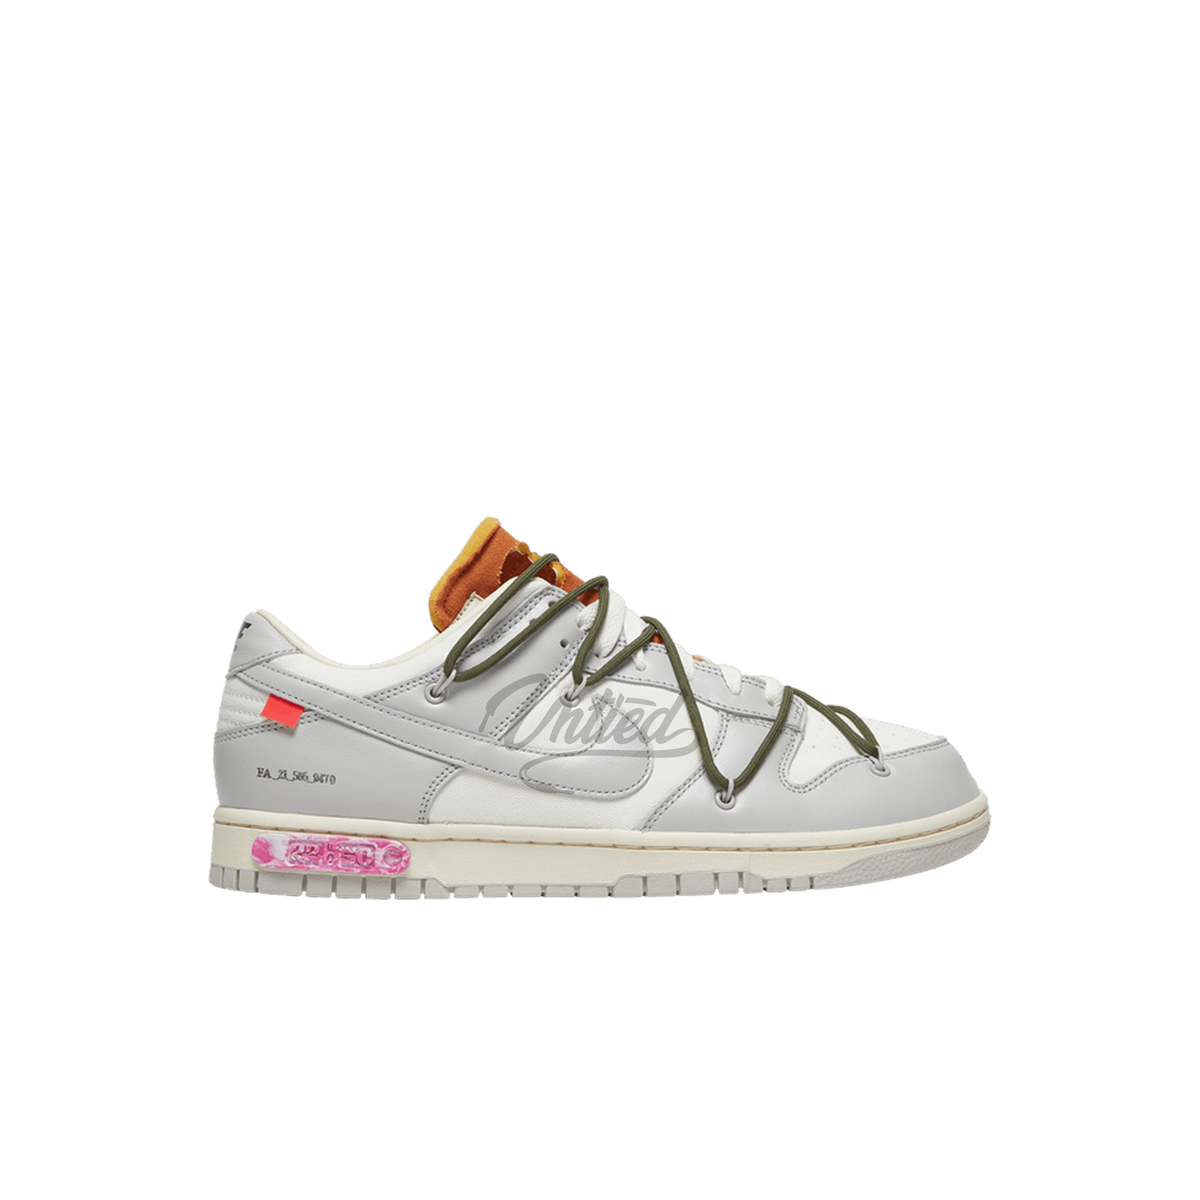 Off-White Nike Dunk Low "Lot 22"